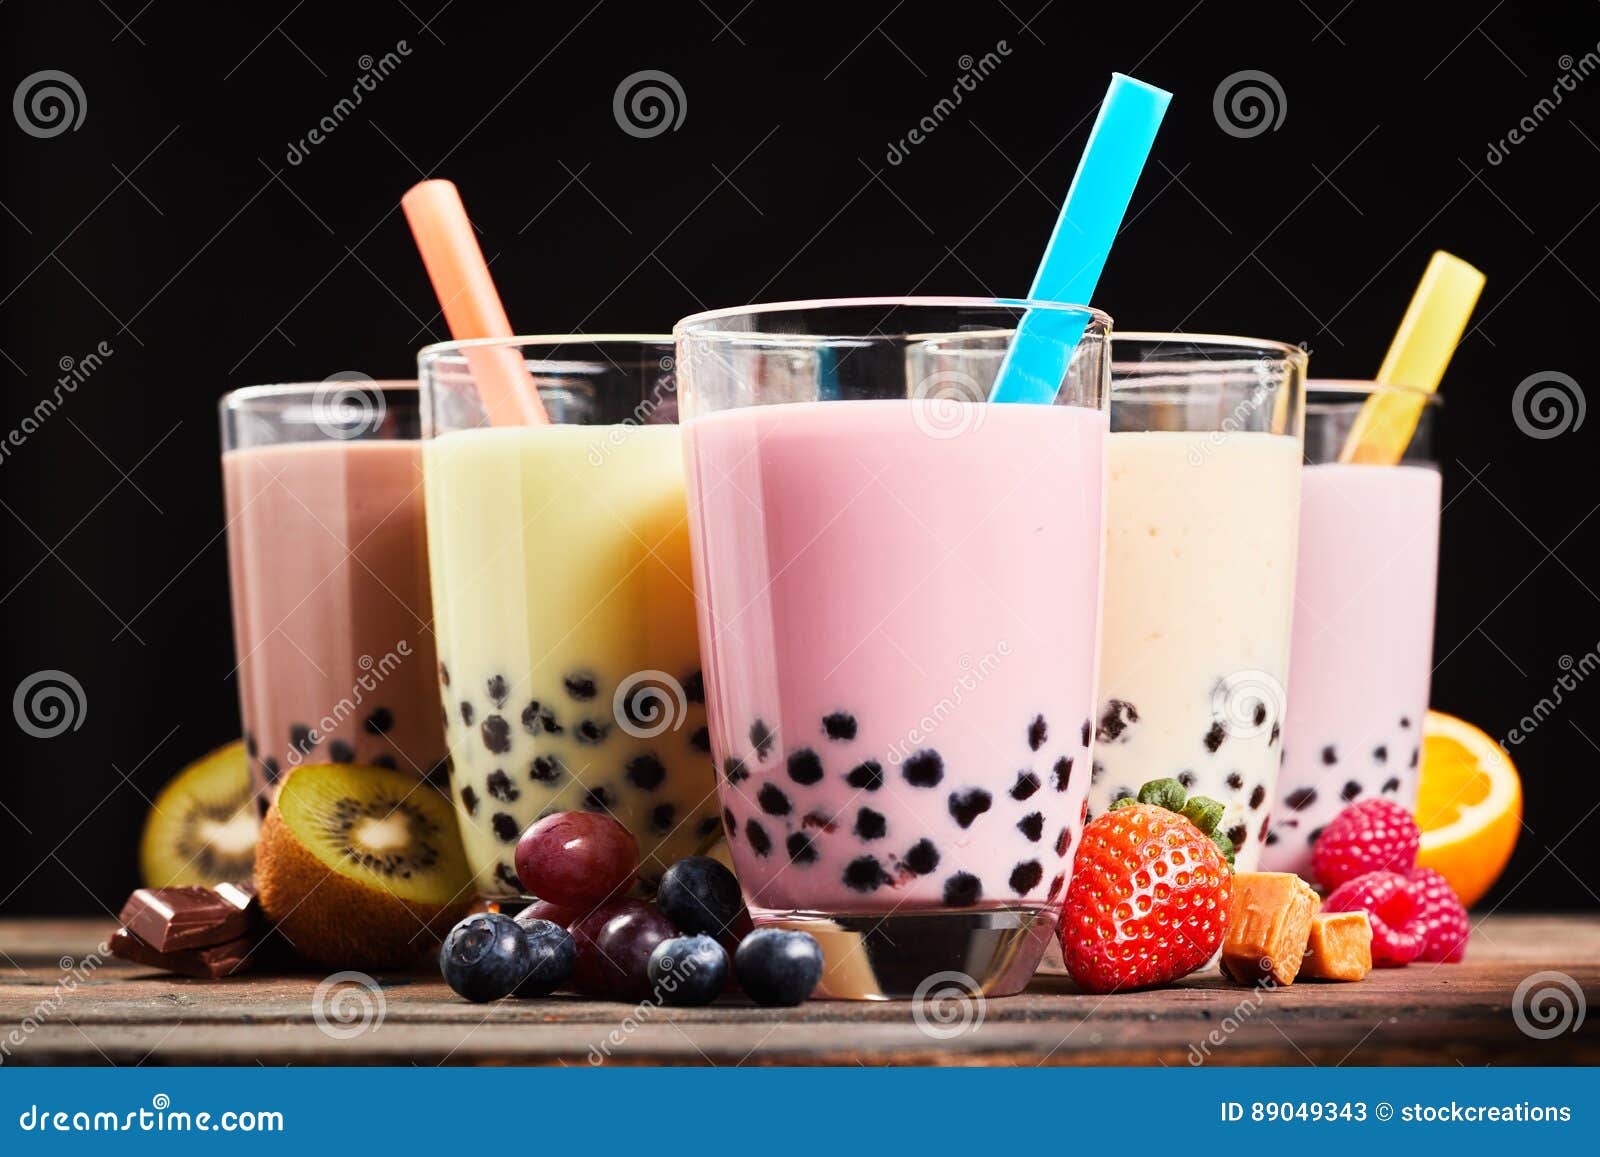 Glasses of Refreshing Milky Boba or Bubble Tea Stock Image - Image of  flavoring, grapes: 89049343